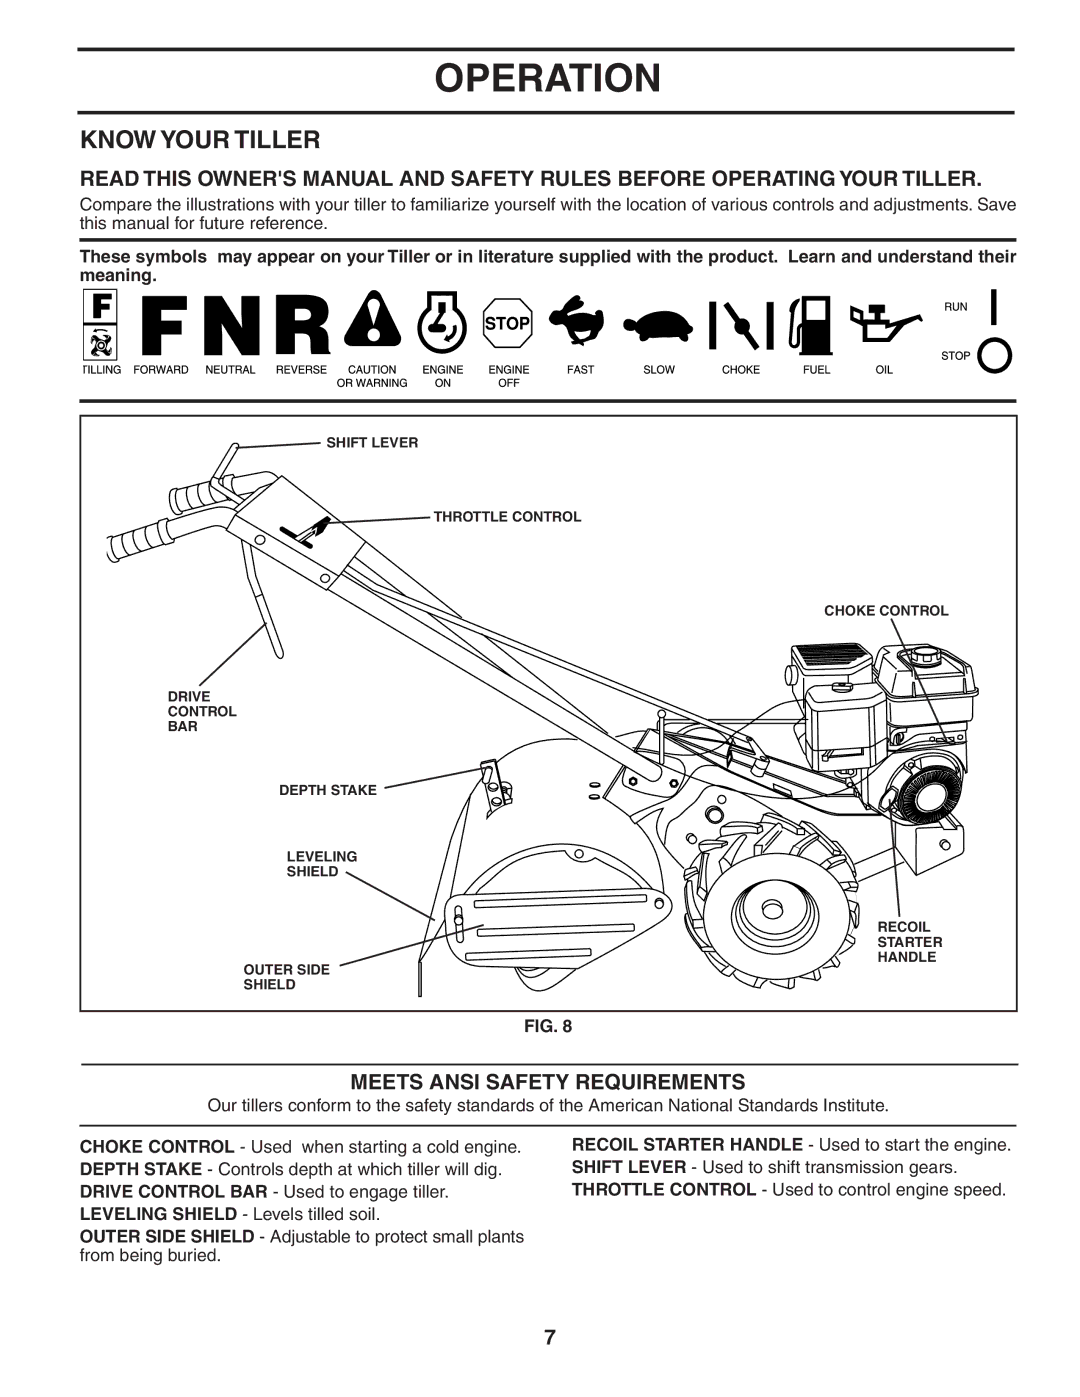 Maxim MXR500 owner manual Operation, Know Your Tiller, Meets Ansi Safety Requirements 